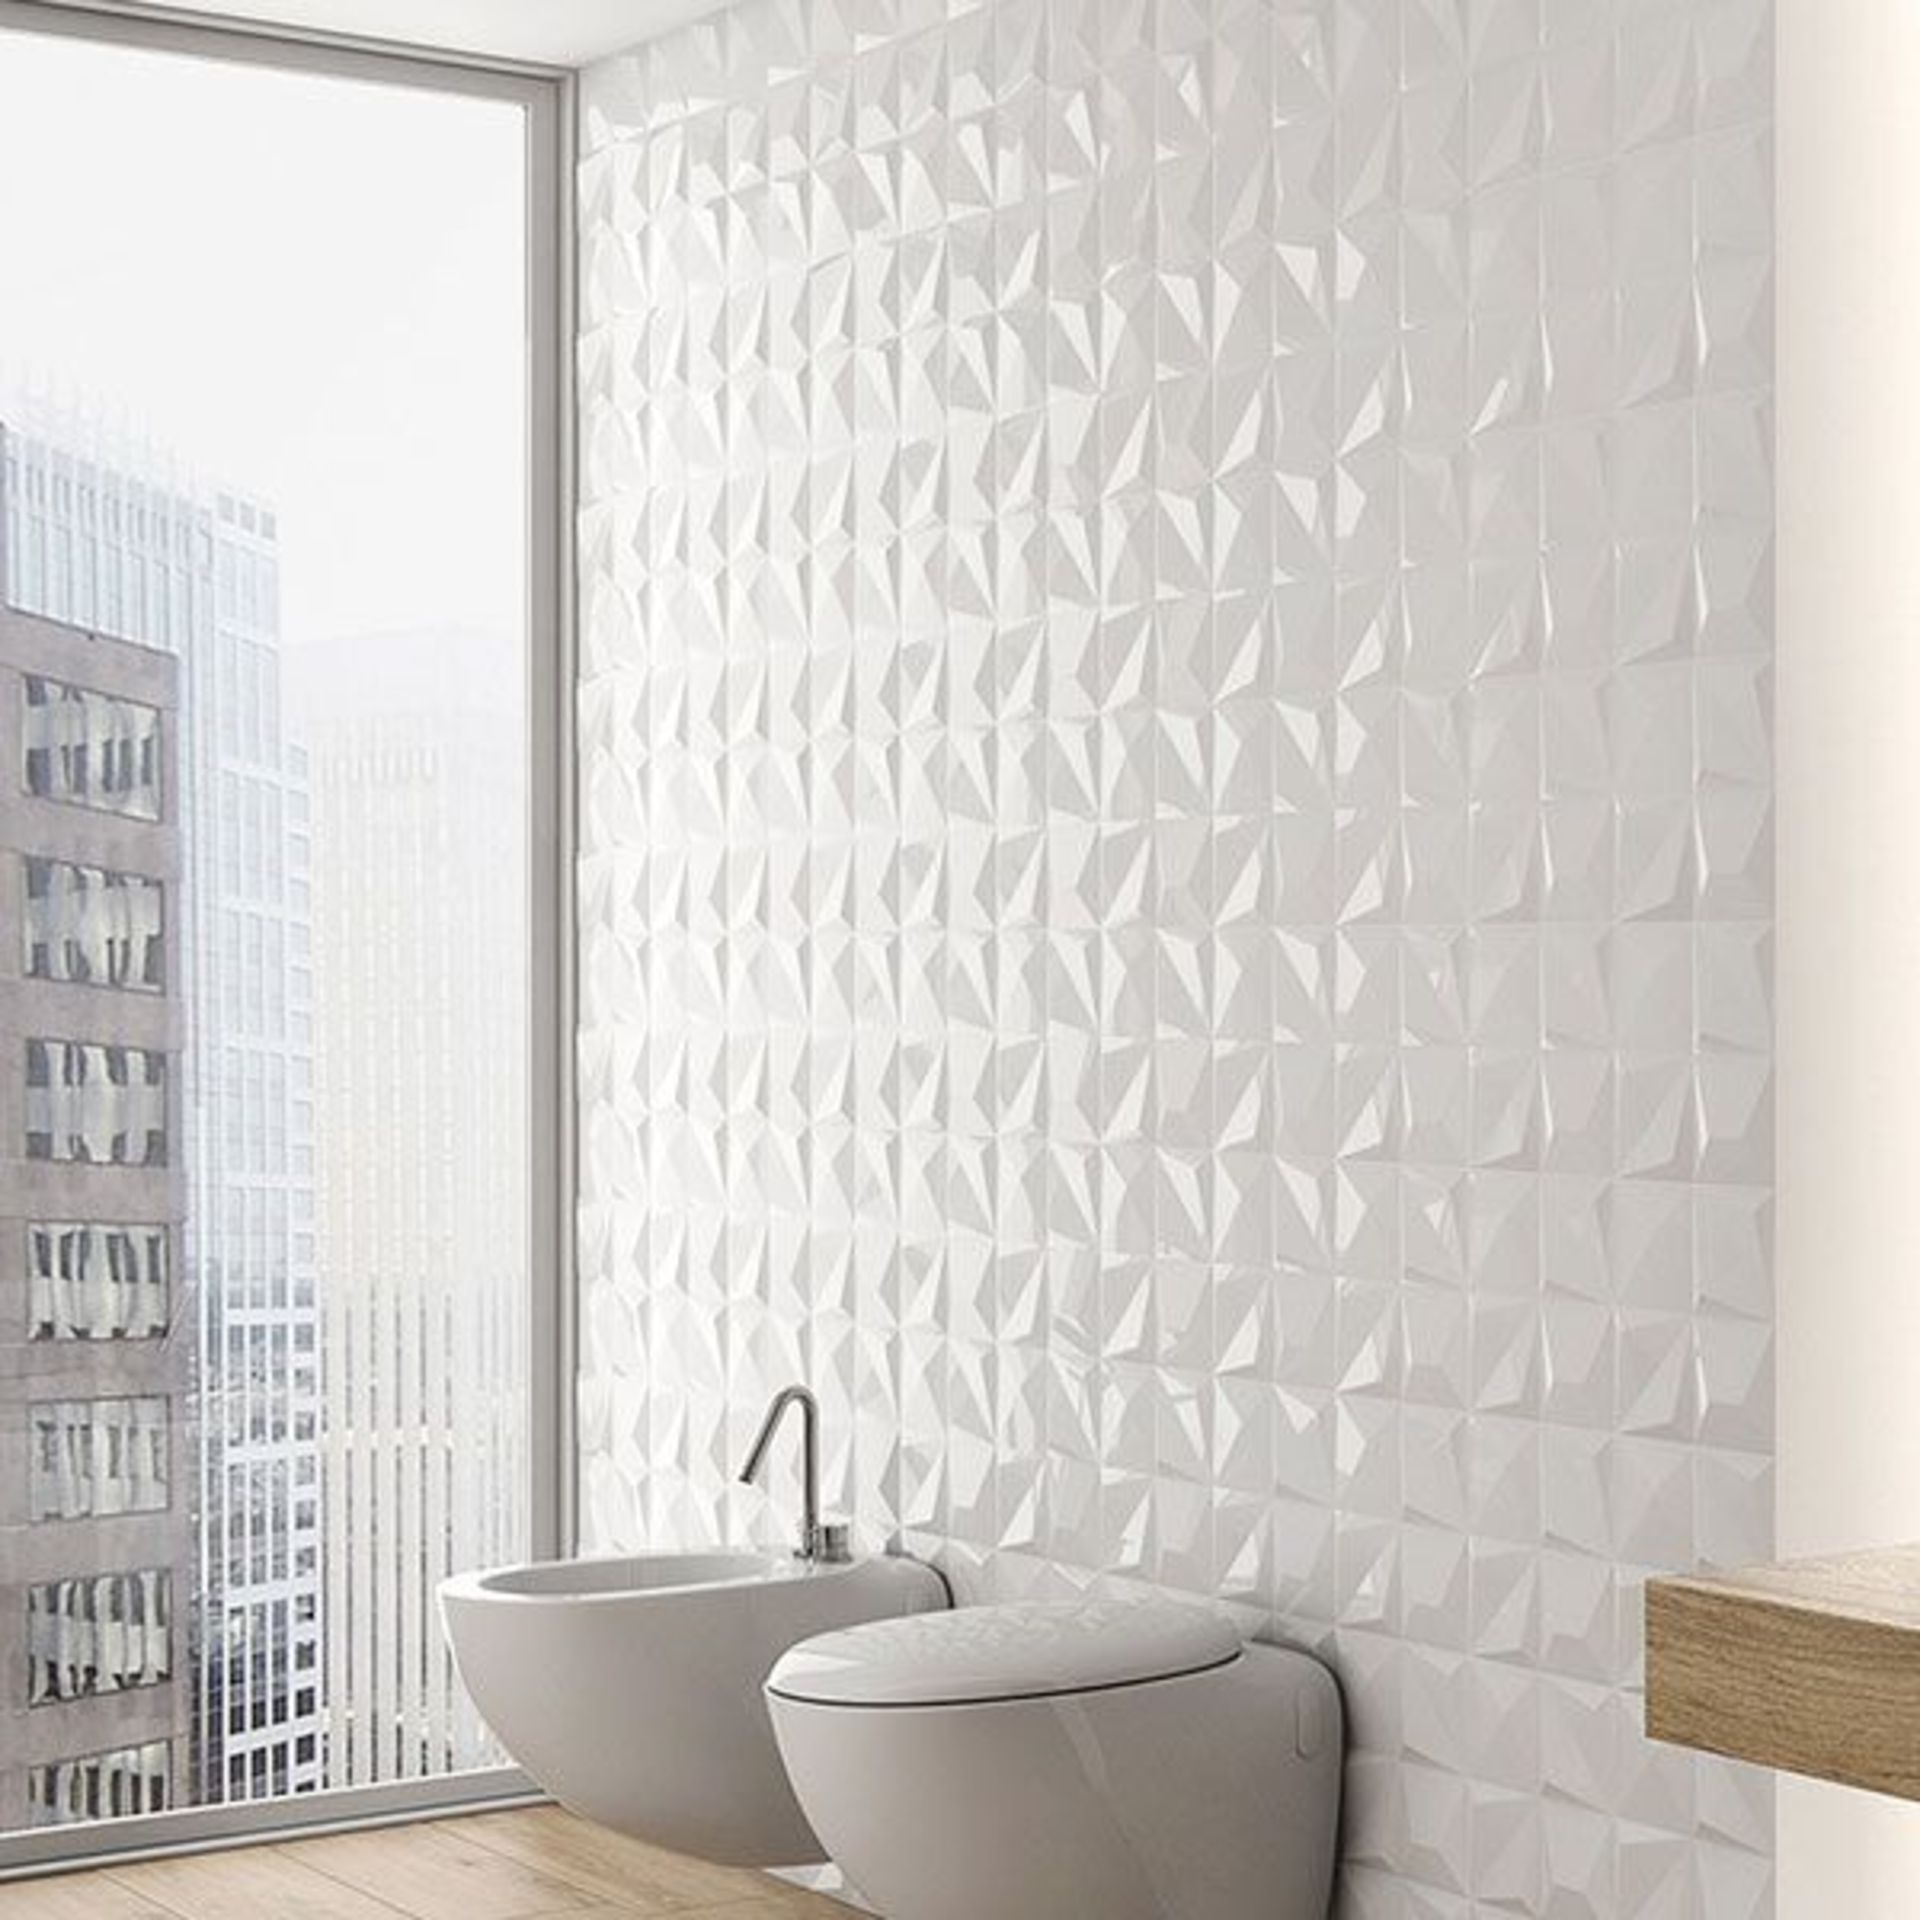 NEW 7.2 Square Meters of 3D White Star Effect Wall and Floor Tiles. 300x600mm per tile. 8mm T...